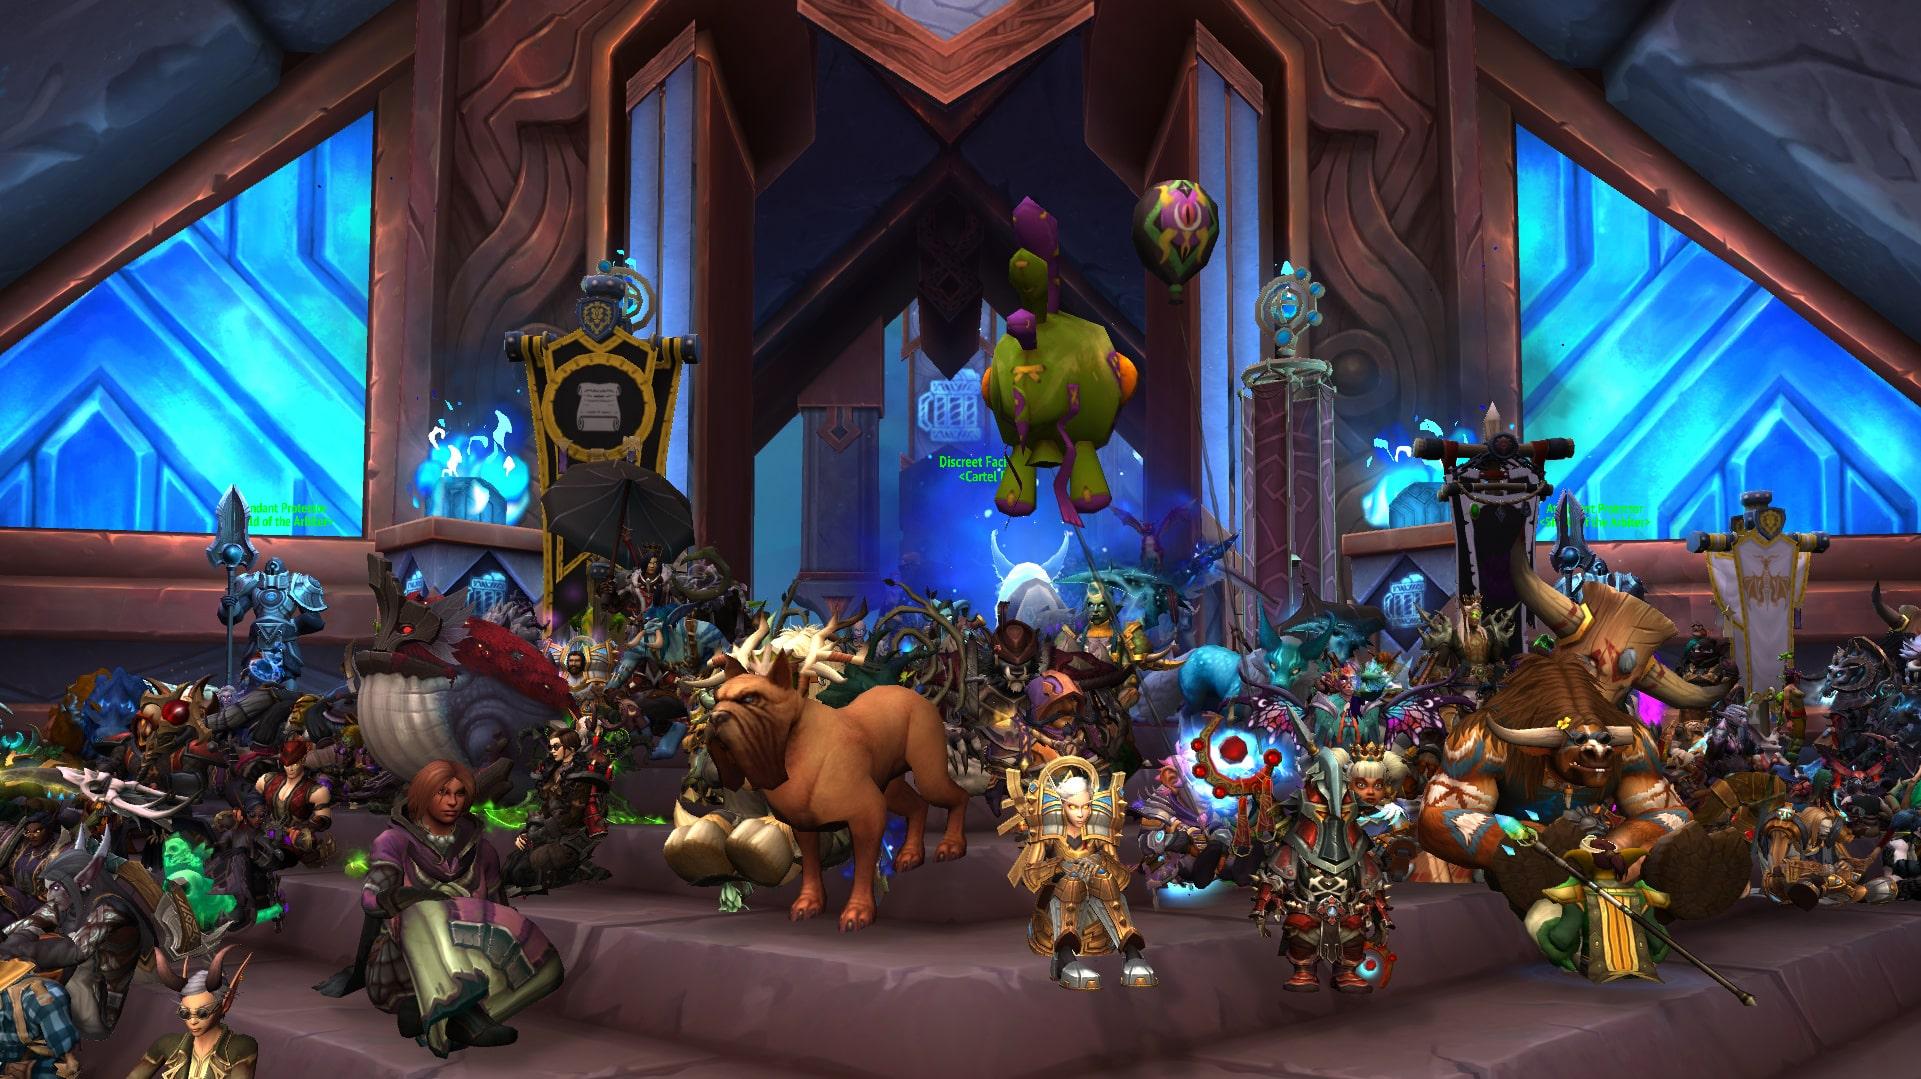 A group of world of warcraft characters sitting on a large set of stairs